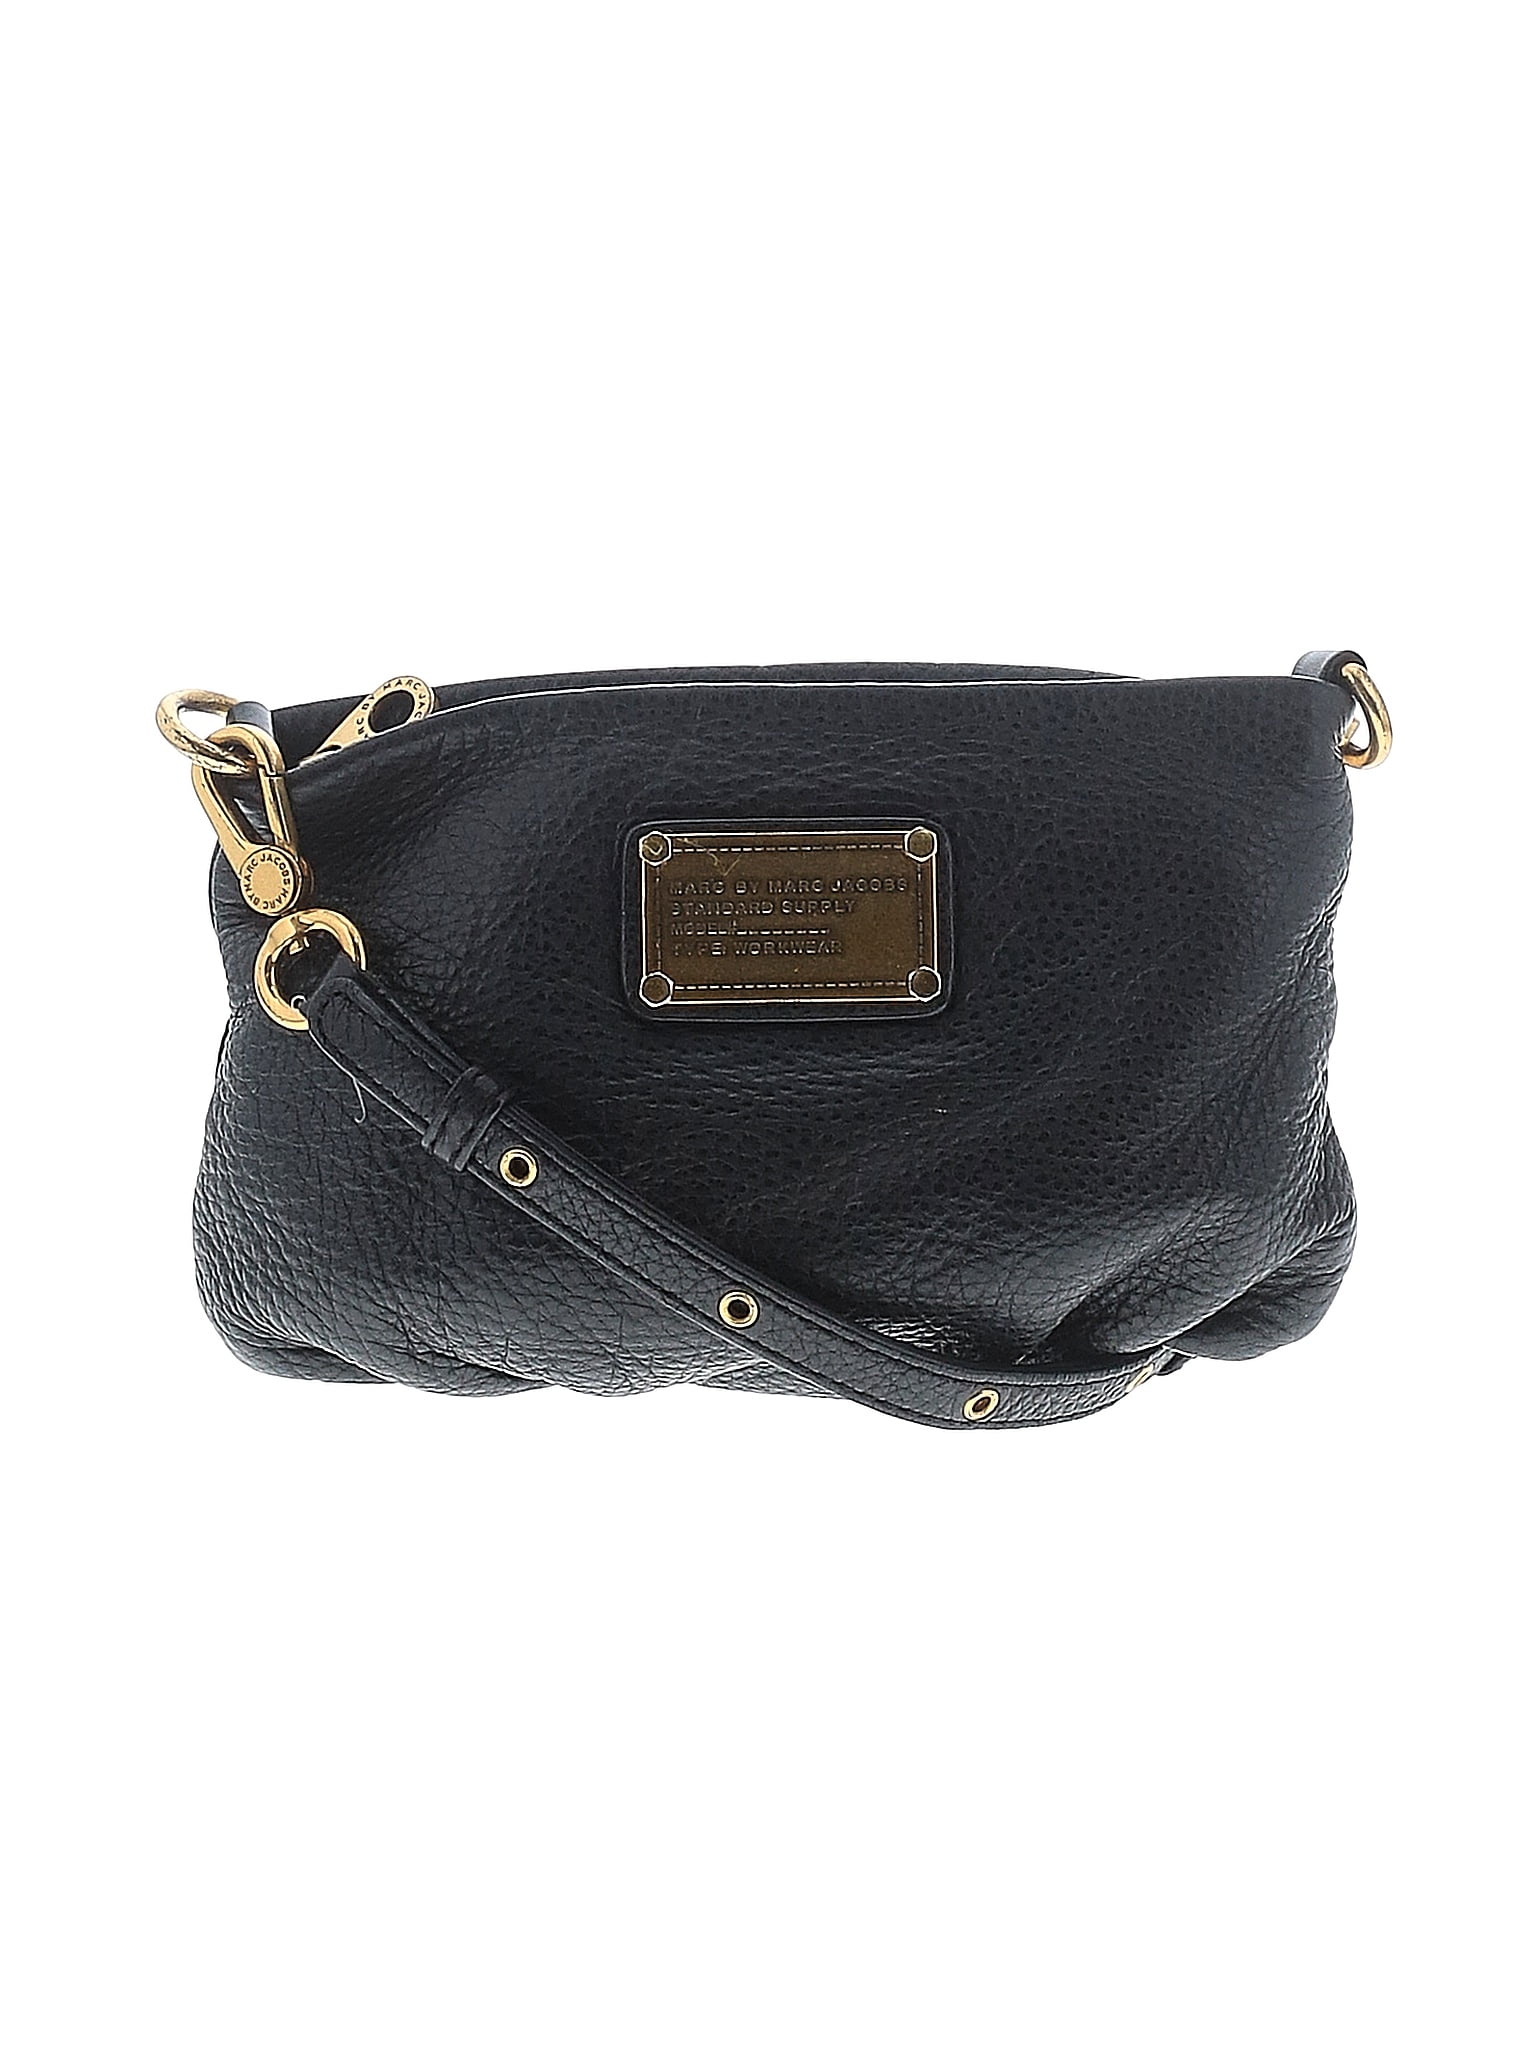 Marc By Marc Jacobs, Bags, Marc By Marc Jacobs Workwear Clutch Black